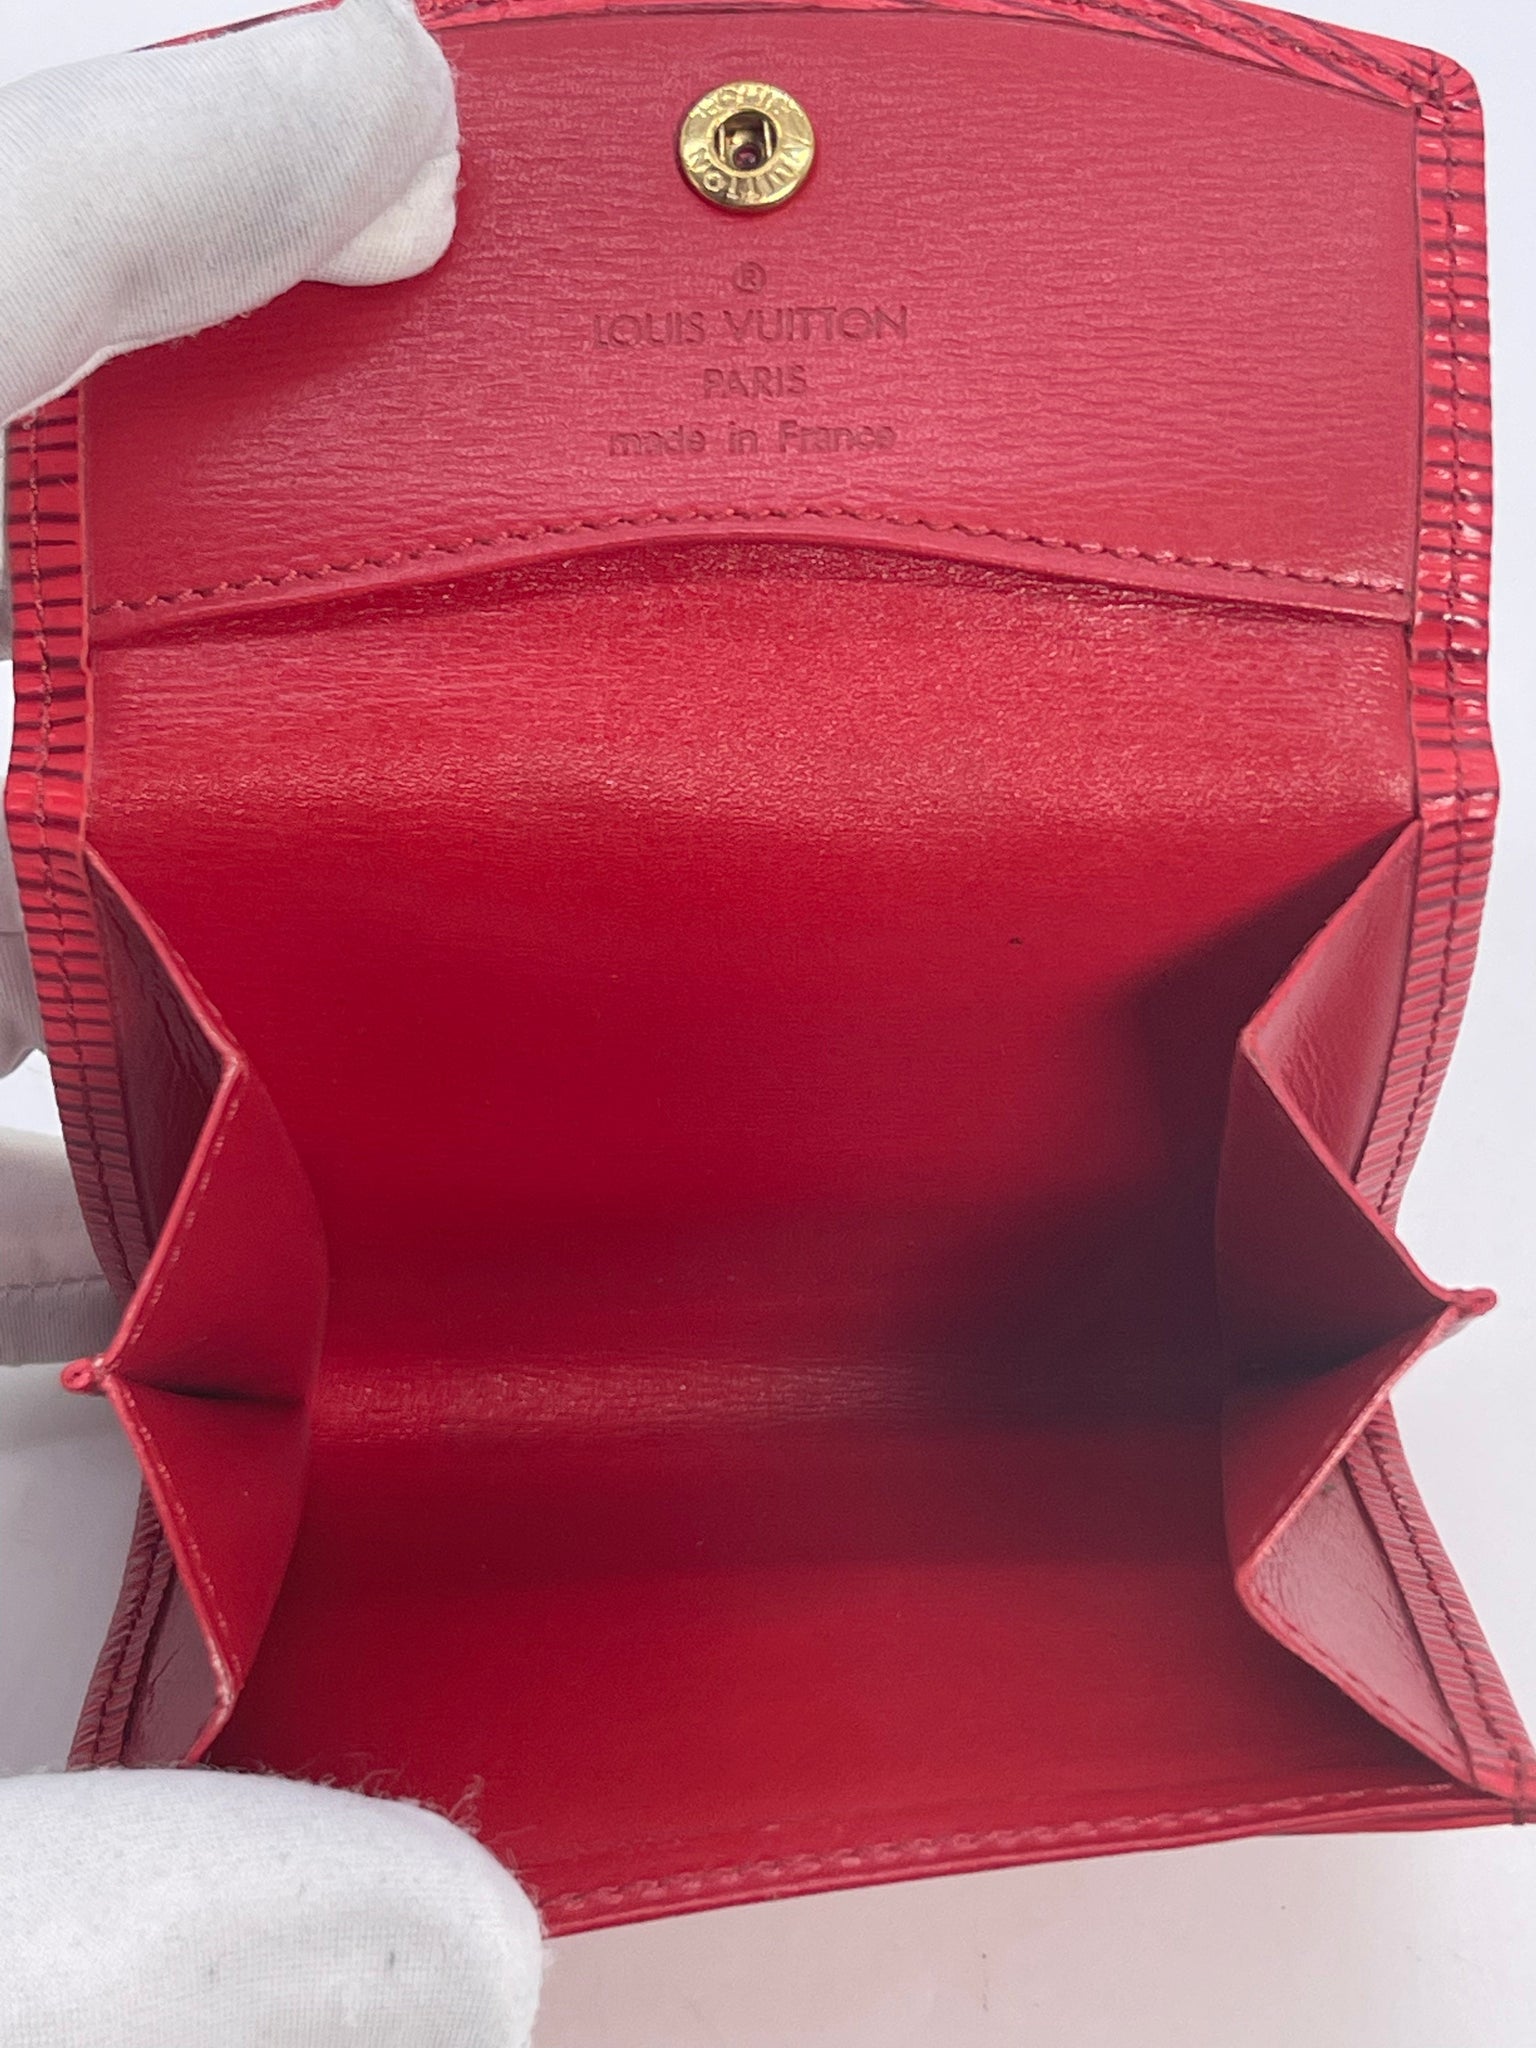 Louis Vuitton - Zippy Wallet - Red Epi Leather - SHW - Pre Loved